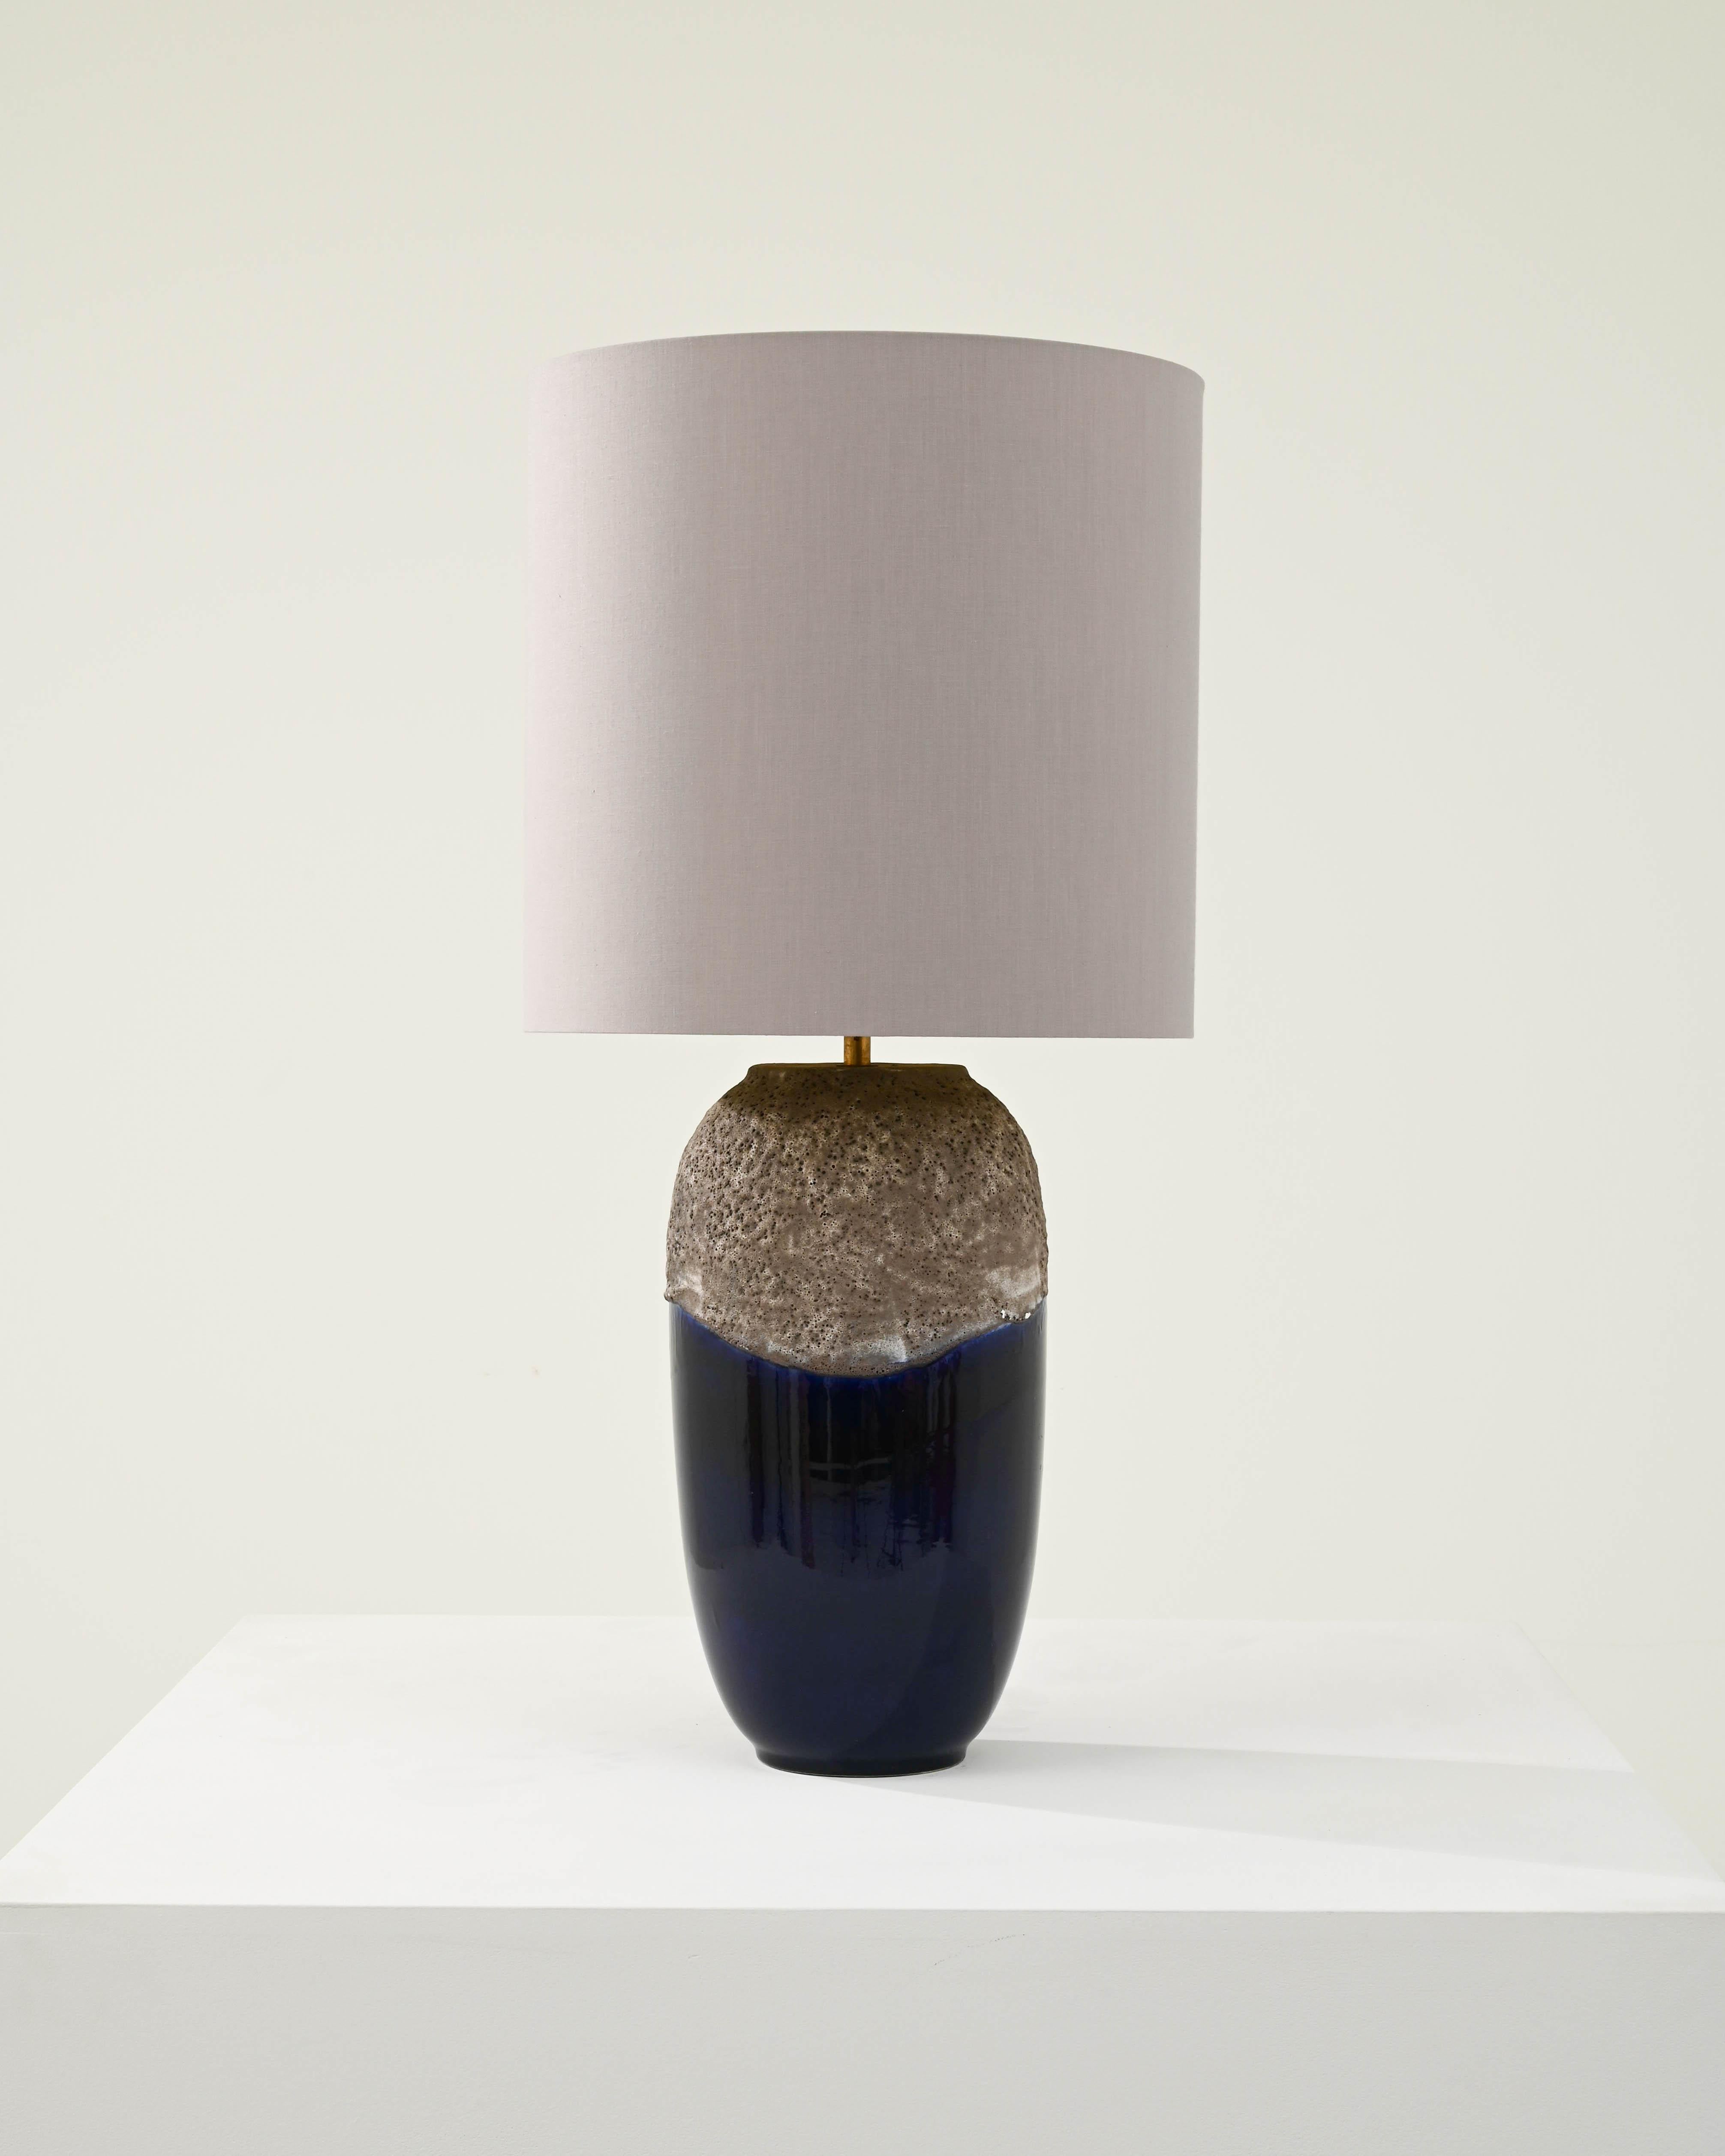 Designed in 1960s Germany, this vintage lamp showcases an alluring ceramic base with a captivating texture that envelops a polished deep blue surface, creating a striking contrast between the organic coarseness and refined sophistication of the